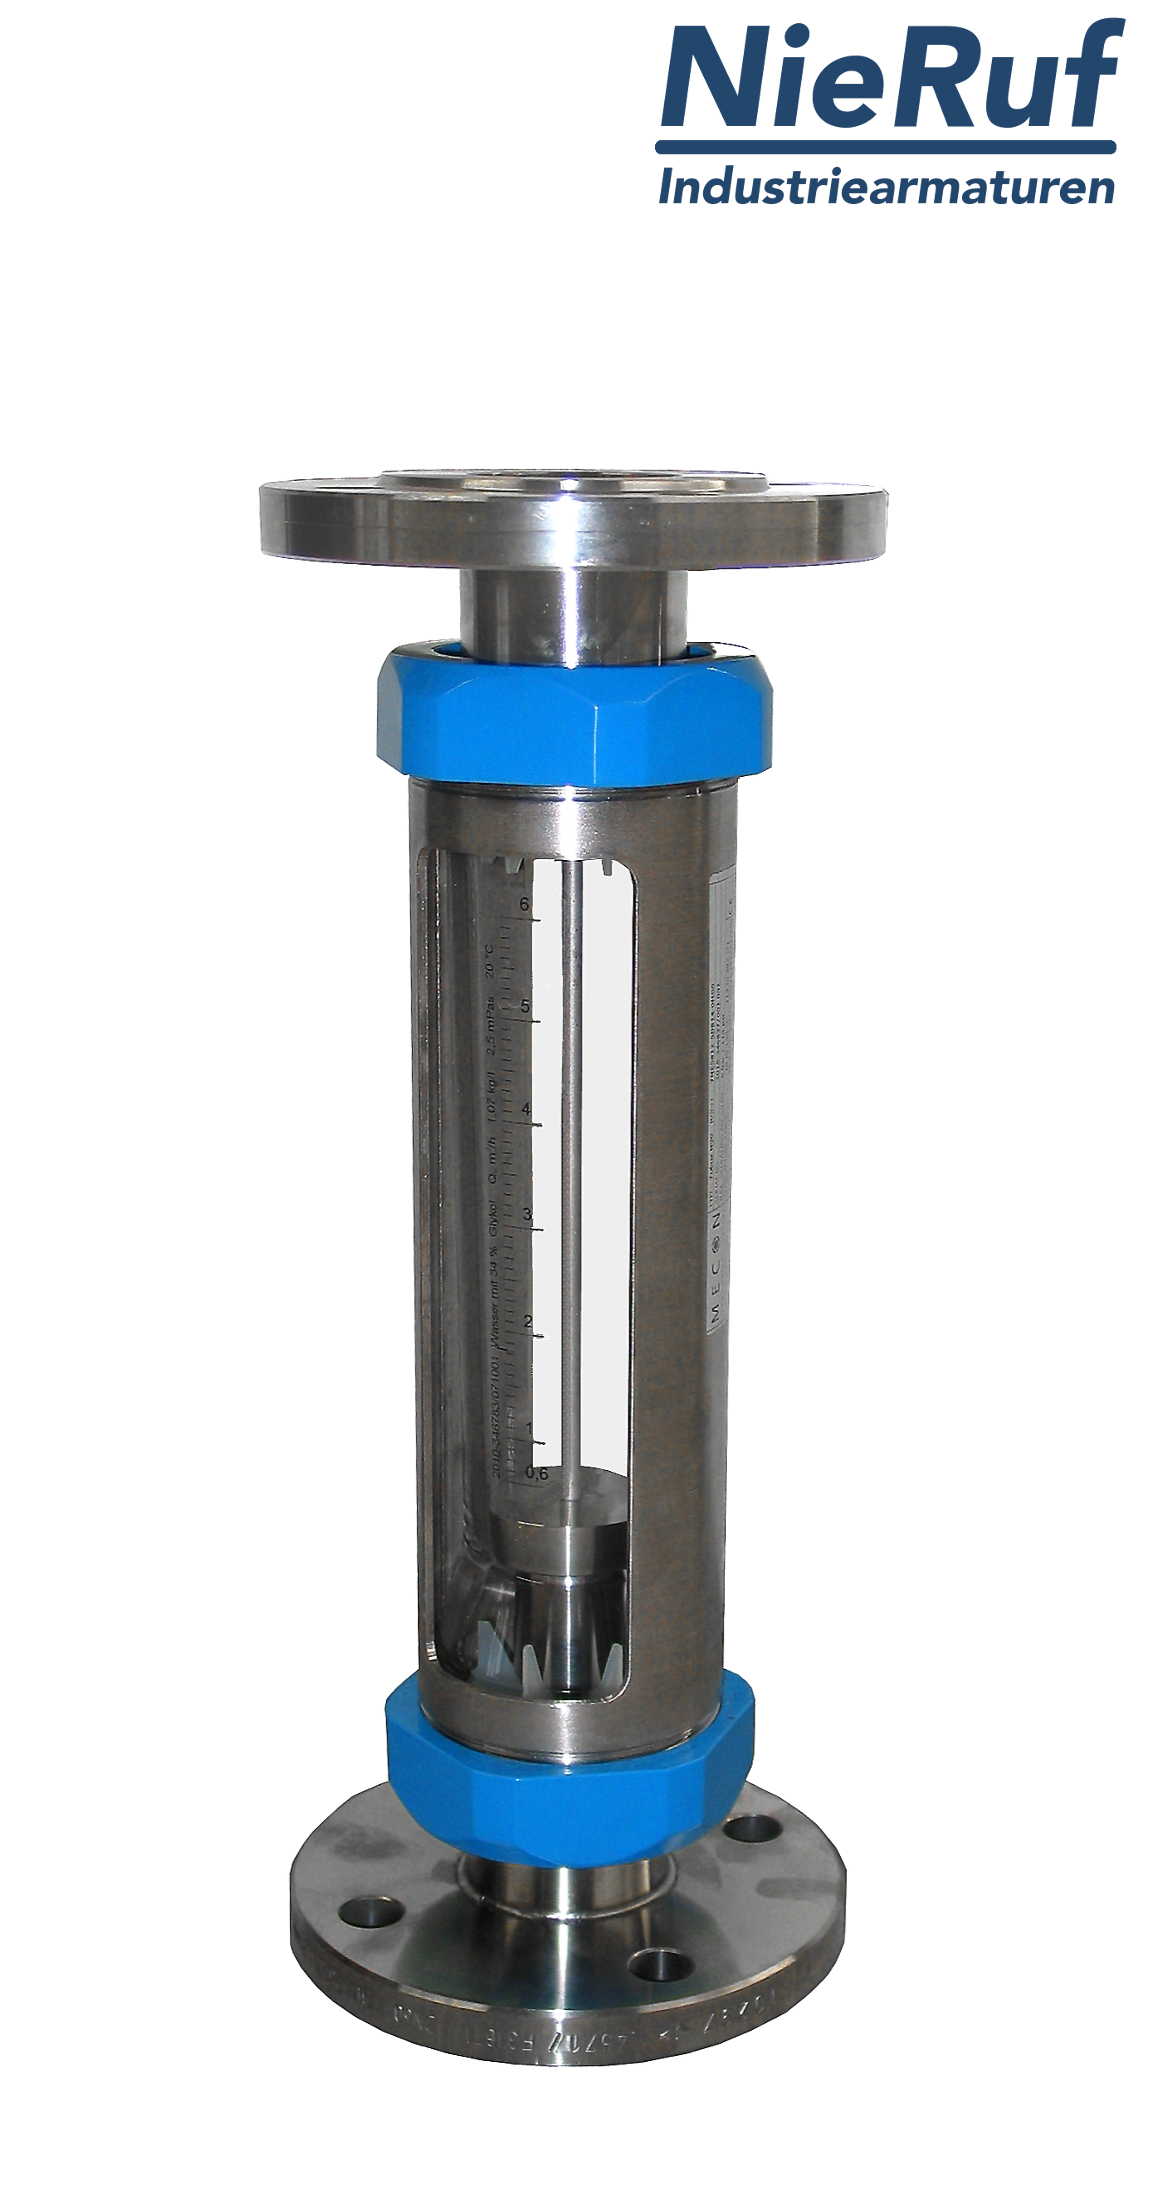 Variable area flowmeter stainless steel + borosilicate flange DN20 8.0 - 80.0 l/h water FKM